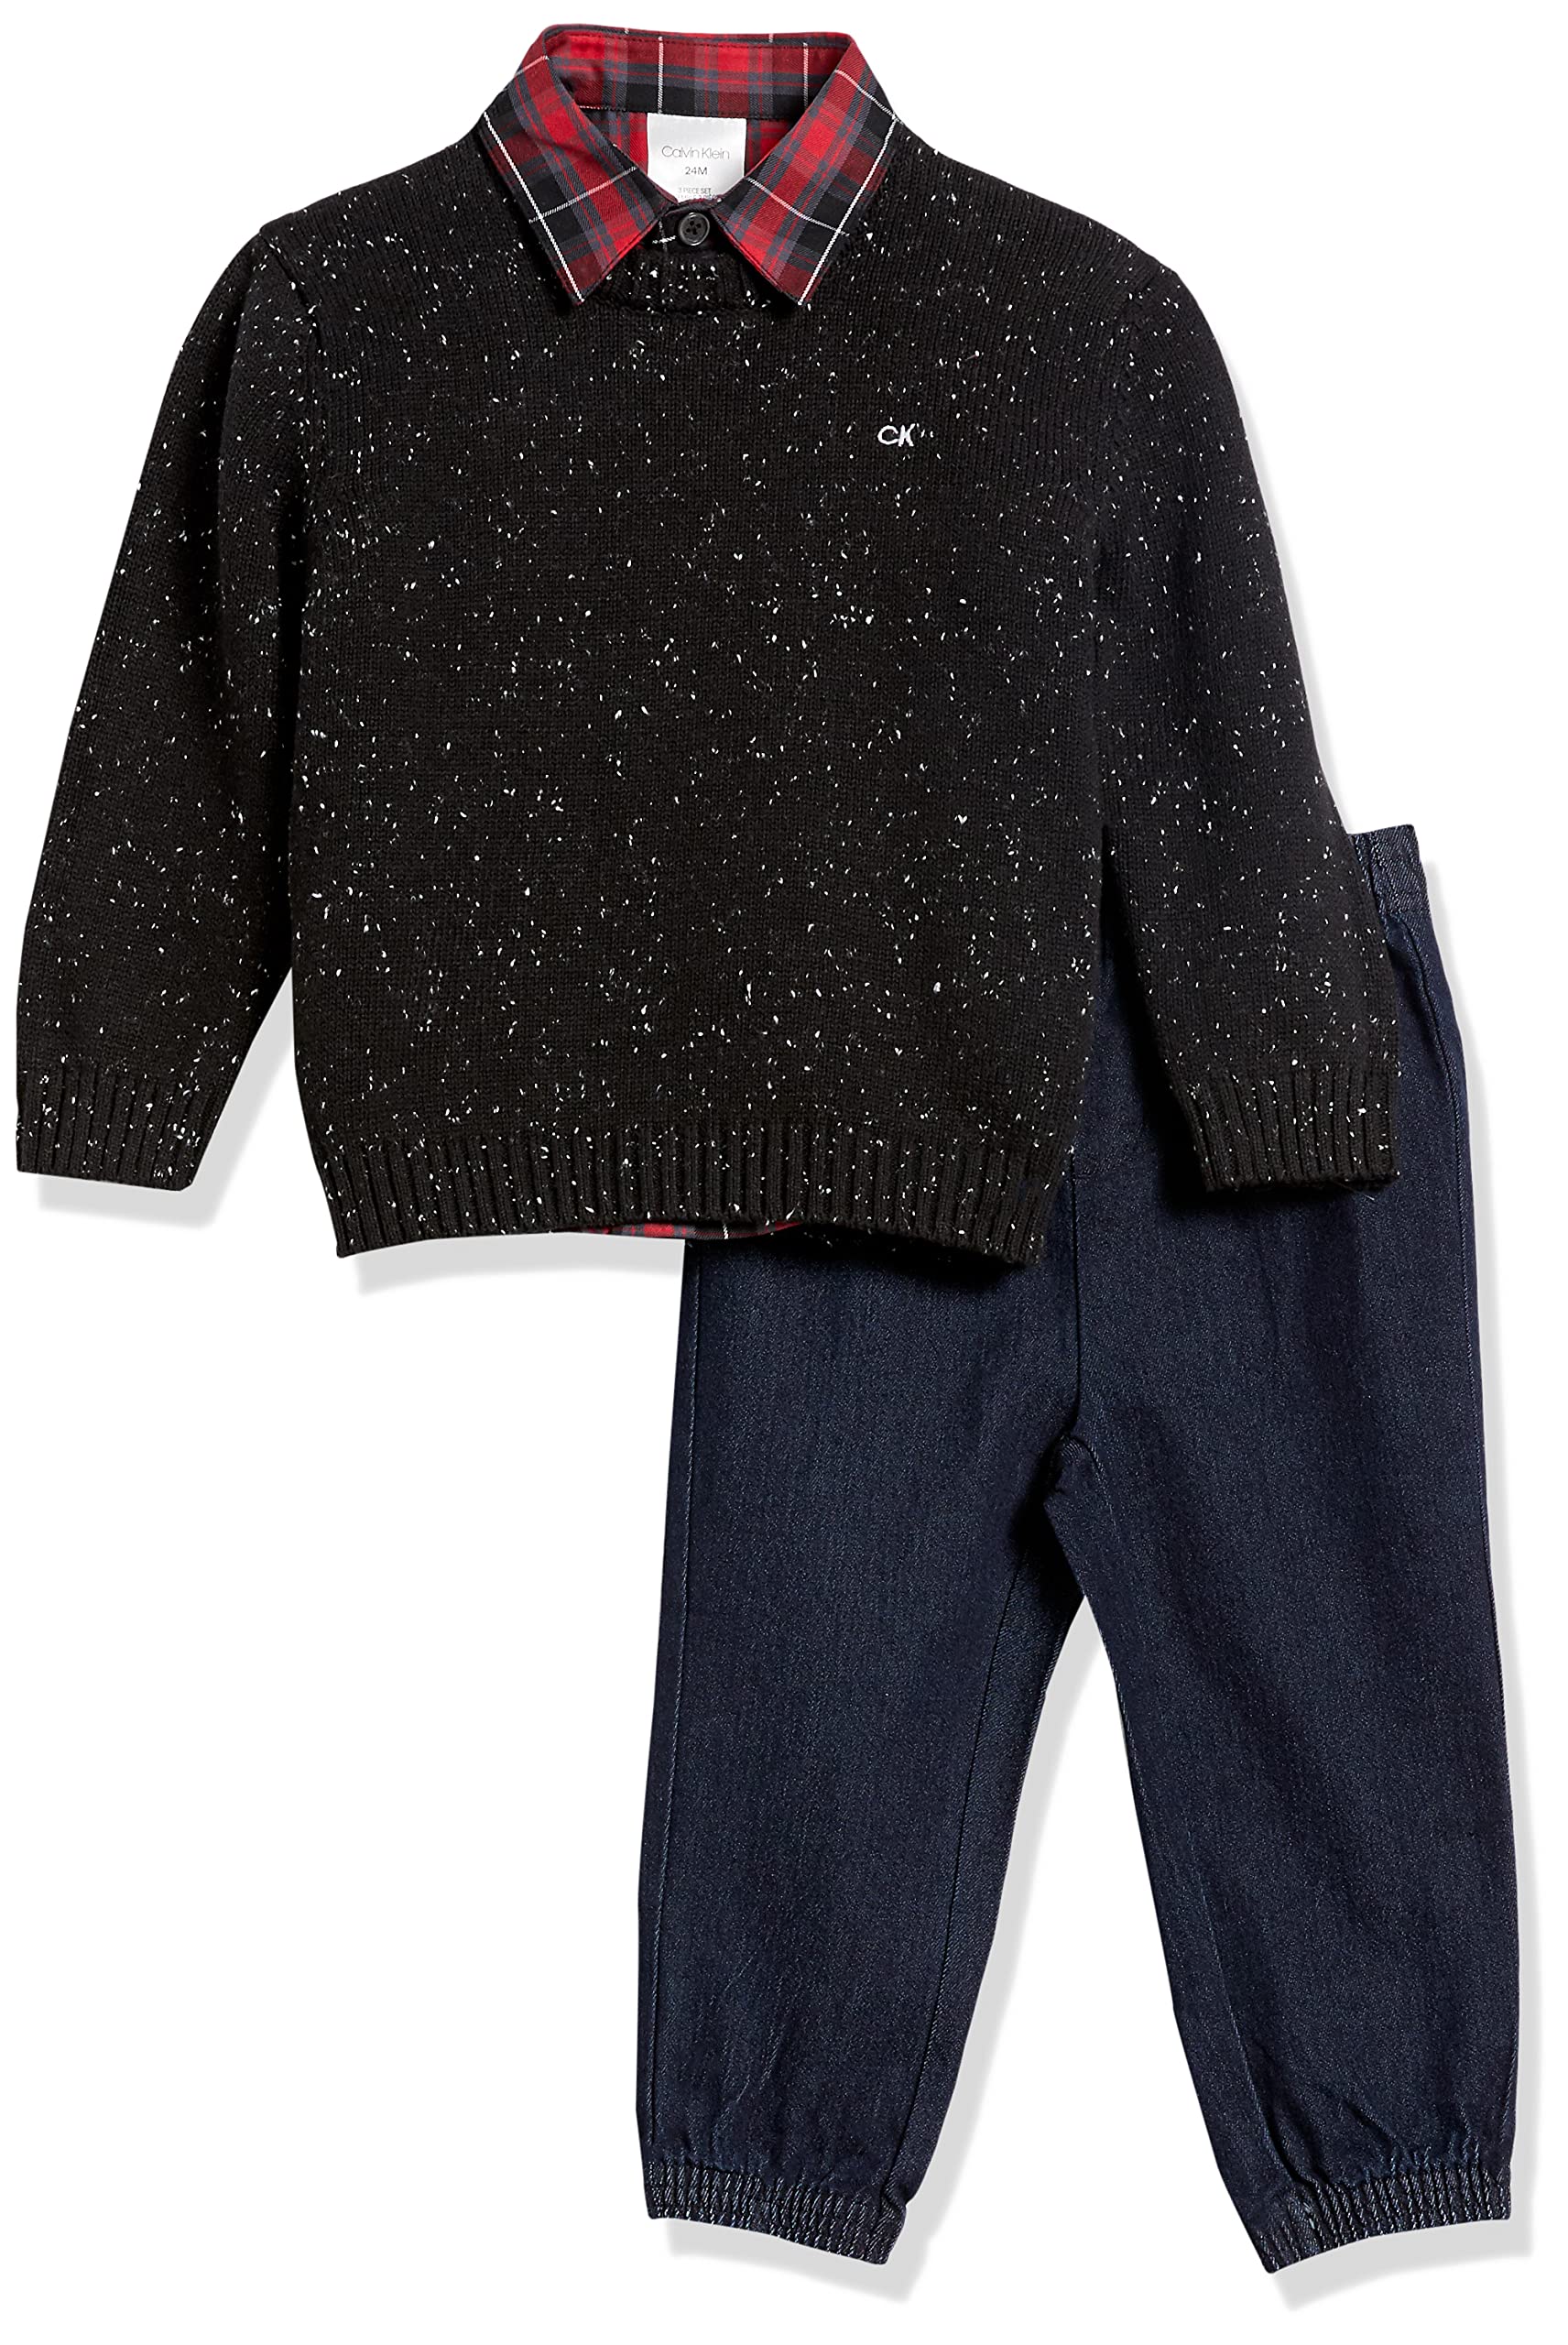 Calvin Klein baby-boys 3-piece Sweater Set With Matching Button-down Shirt and Pants